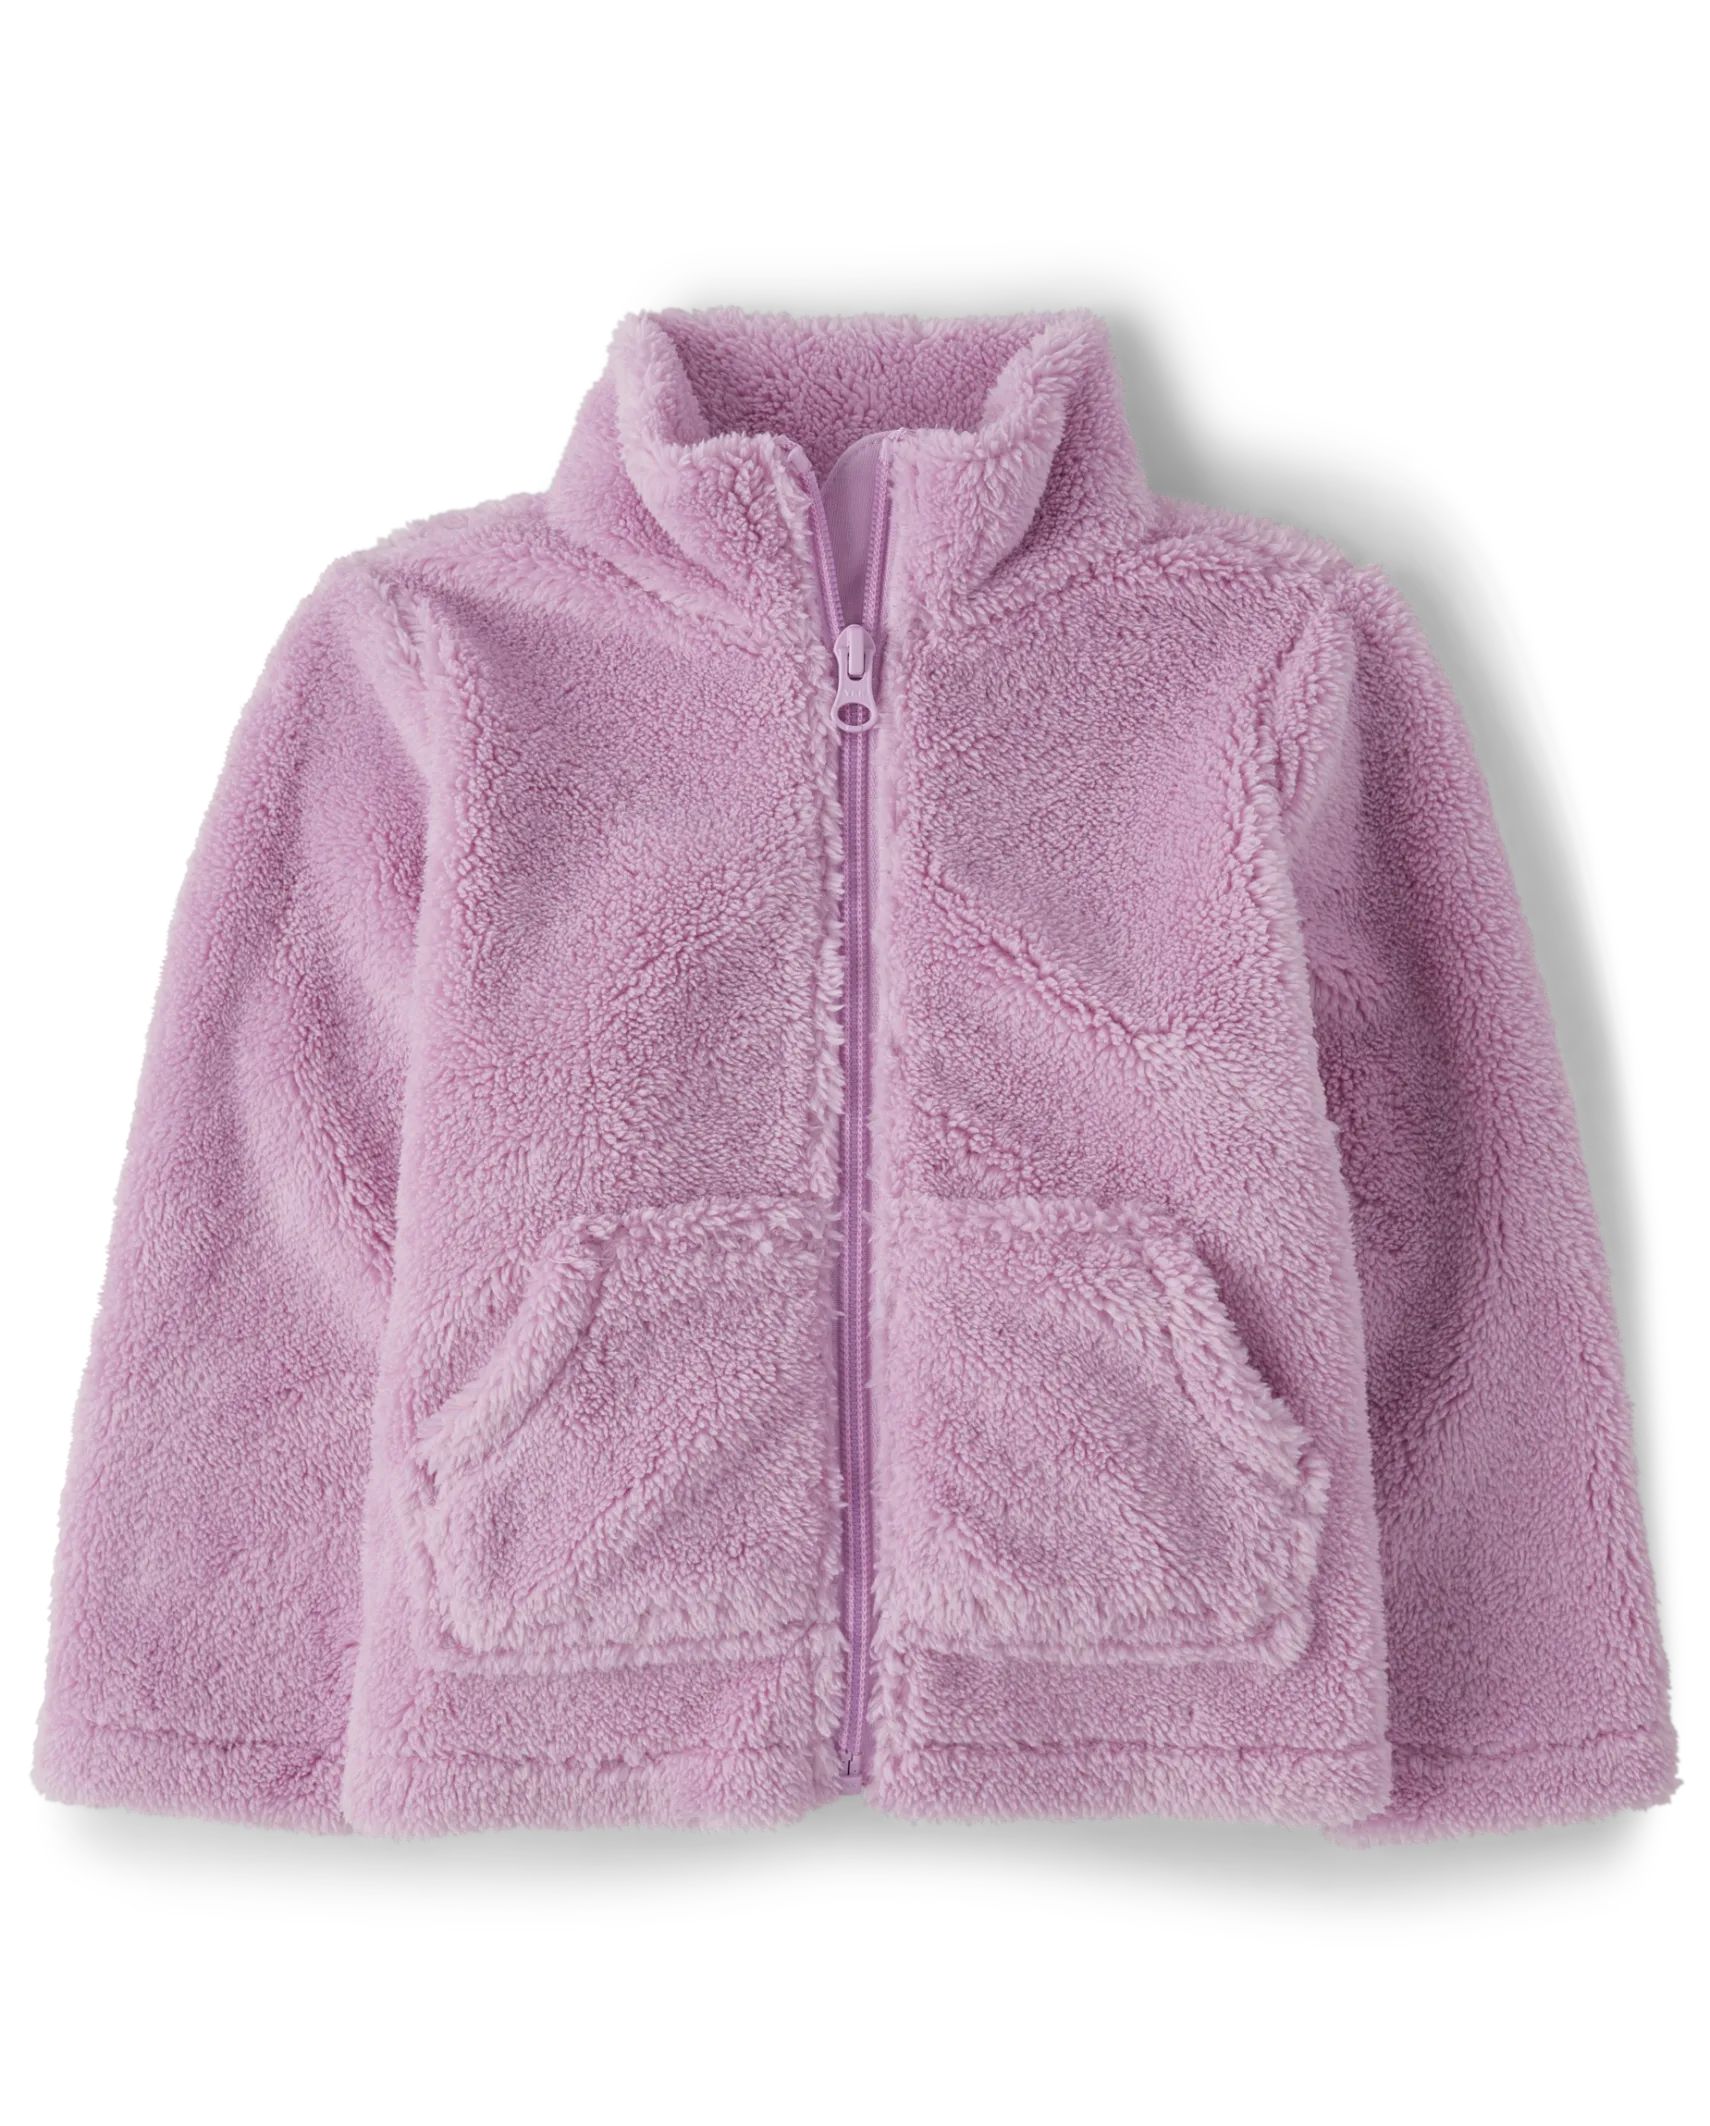 Toddler Girls Sherpa Zip-Up Jacket - lilac dust | The Children's Place